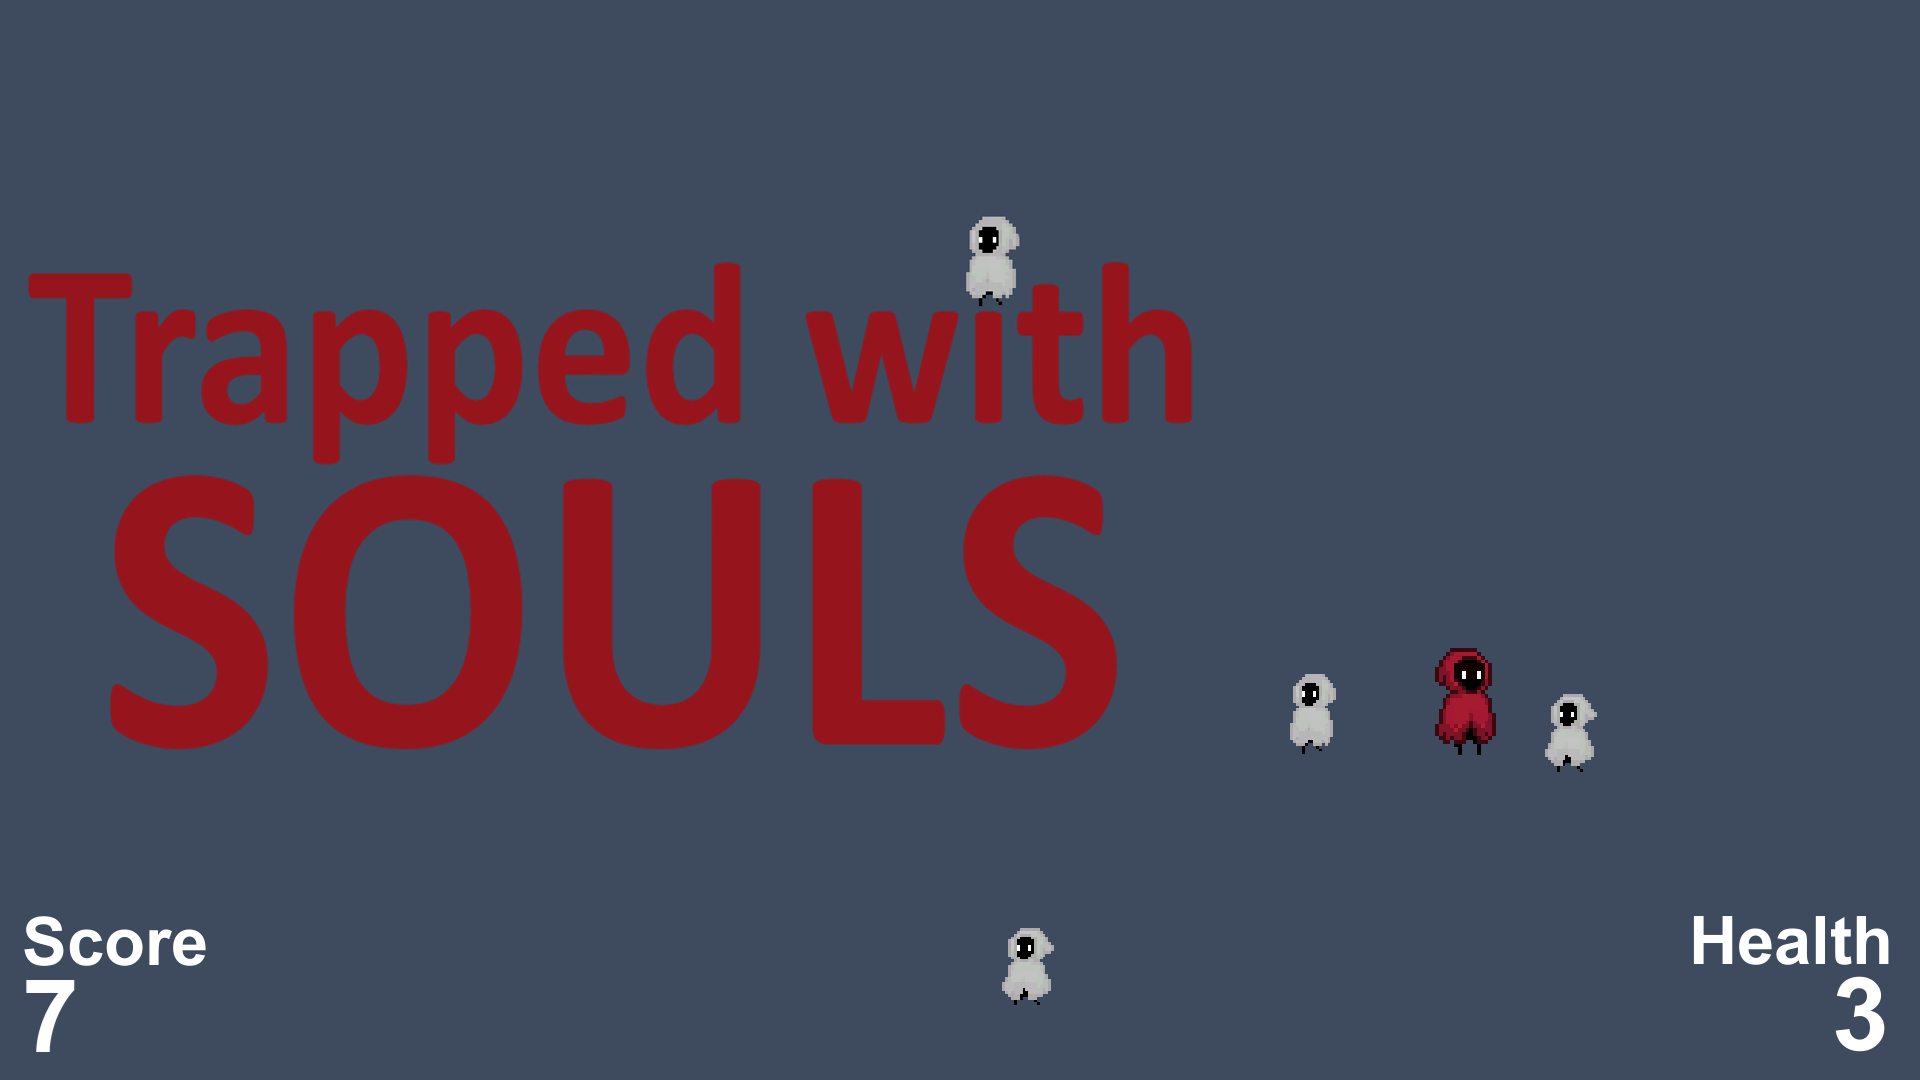 Trapped with souls